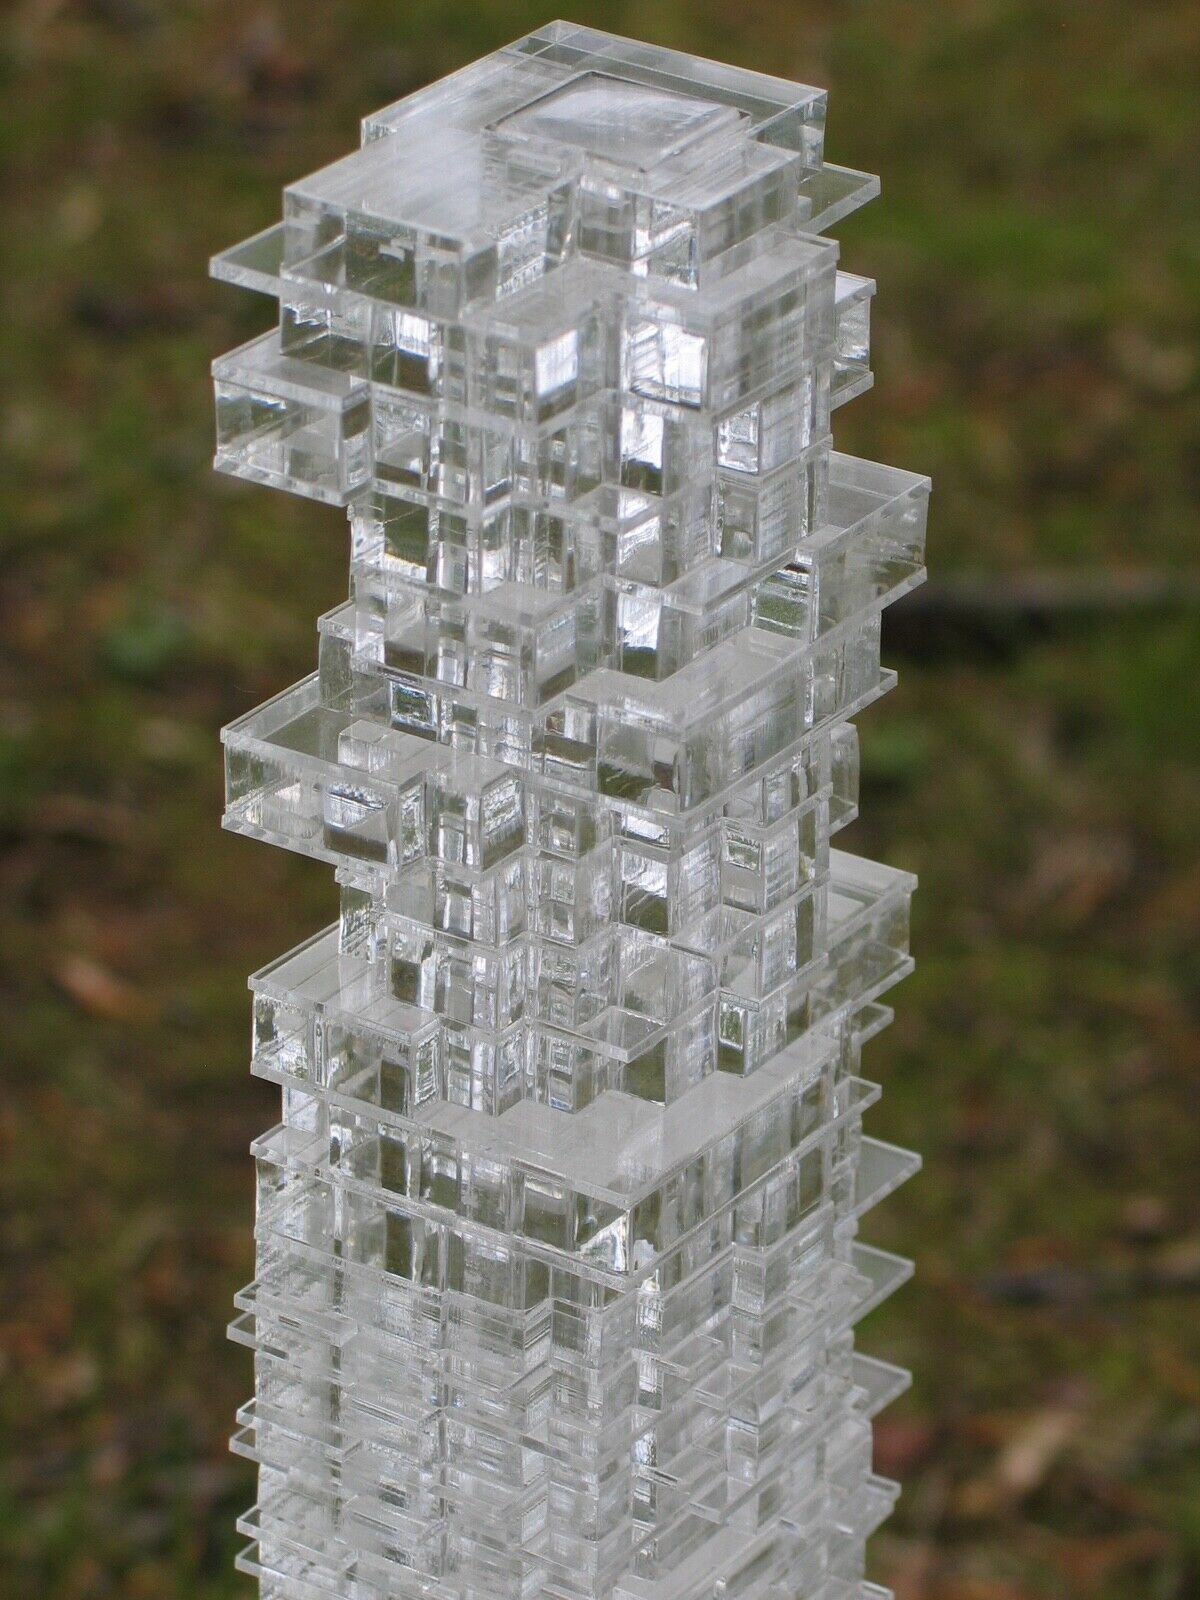 56 Leonard Street Clear Acrylic Tower Model NYC- Limited Production